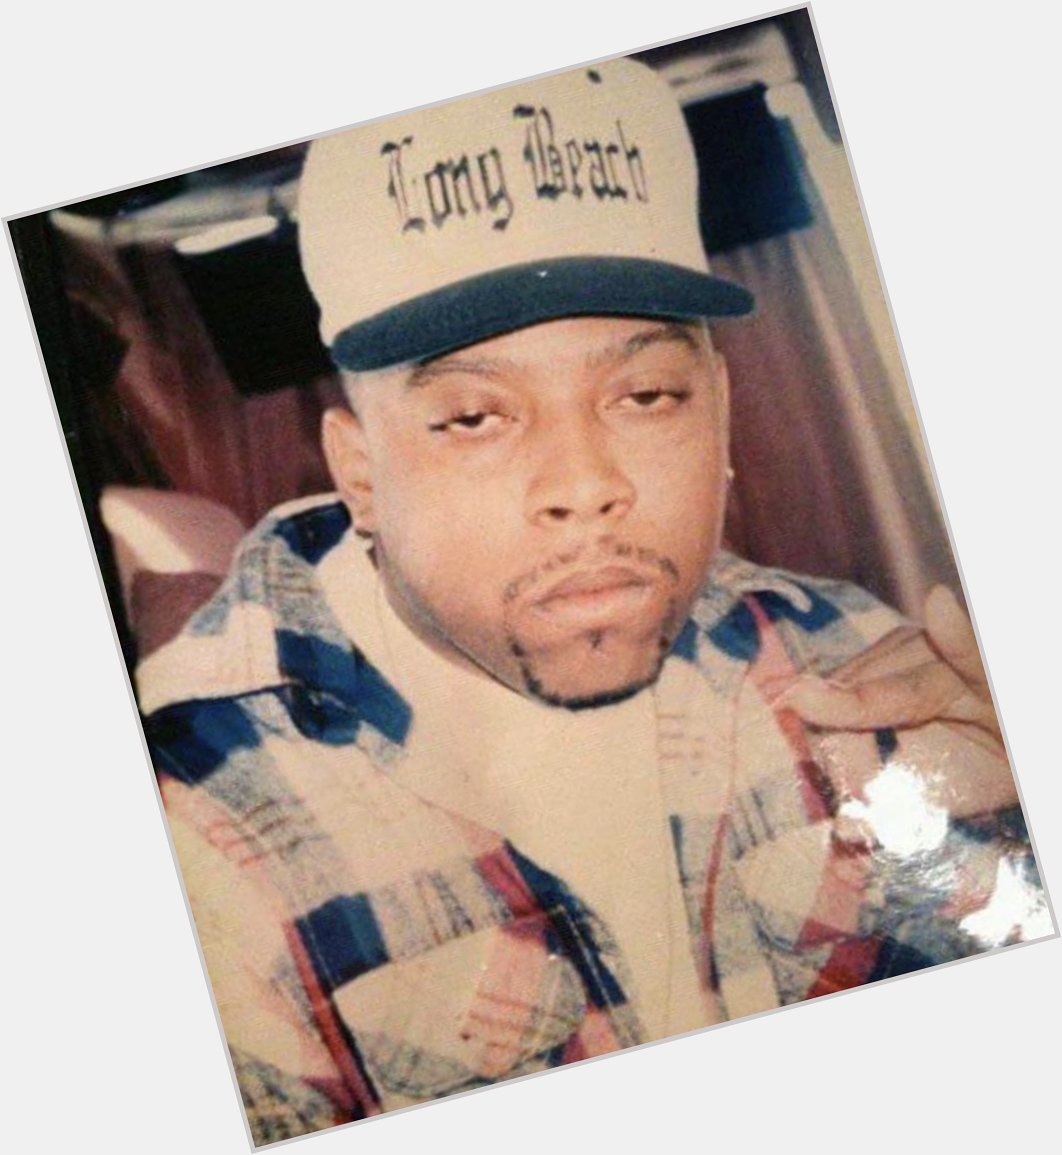 Happy birthday to a real one aka the legend himself, Nate Dogg Leo shit!  rip 